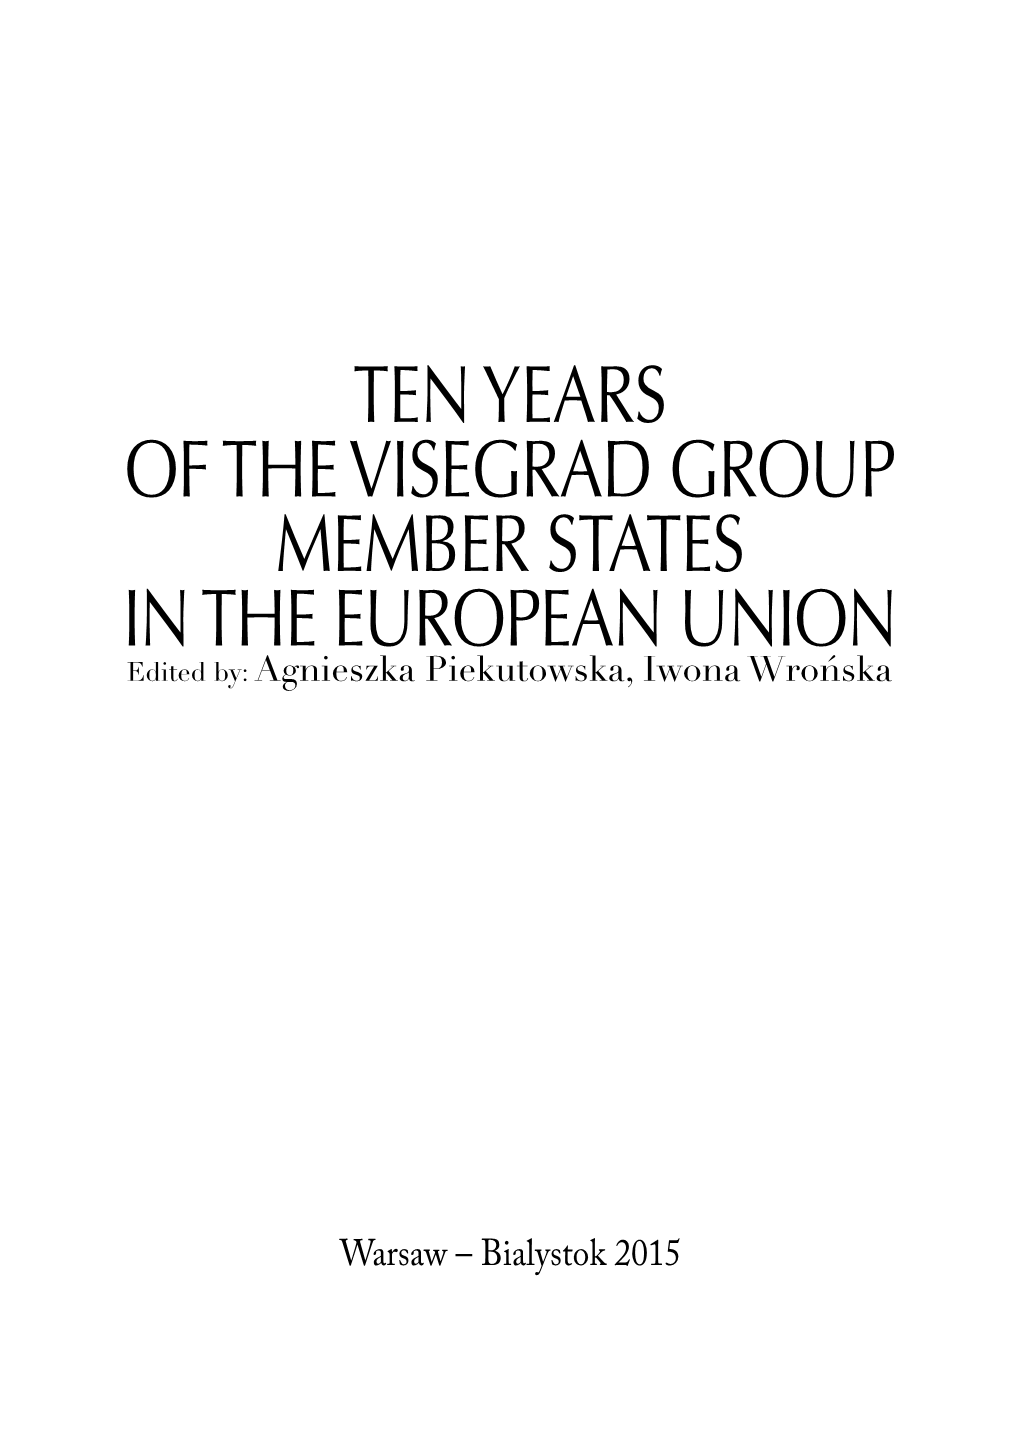 Warsaw – Bialystok 2015 Th E Following Research Has Been Produced Under the Project „Ten Years of the Visegrad Group Member States in the European Union”